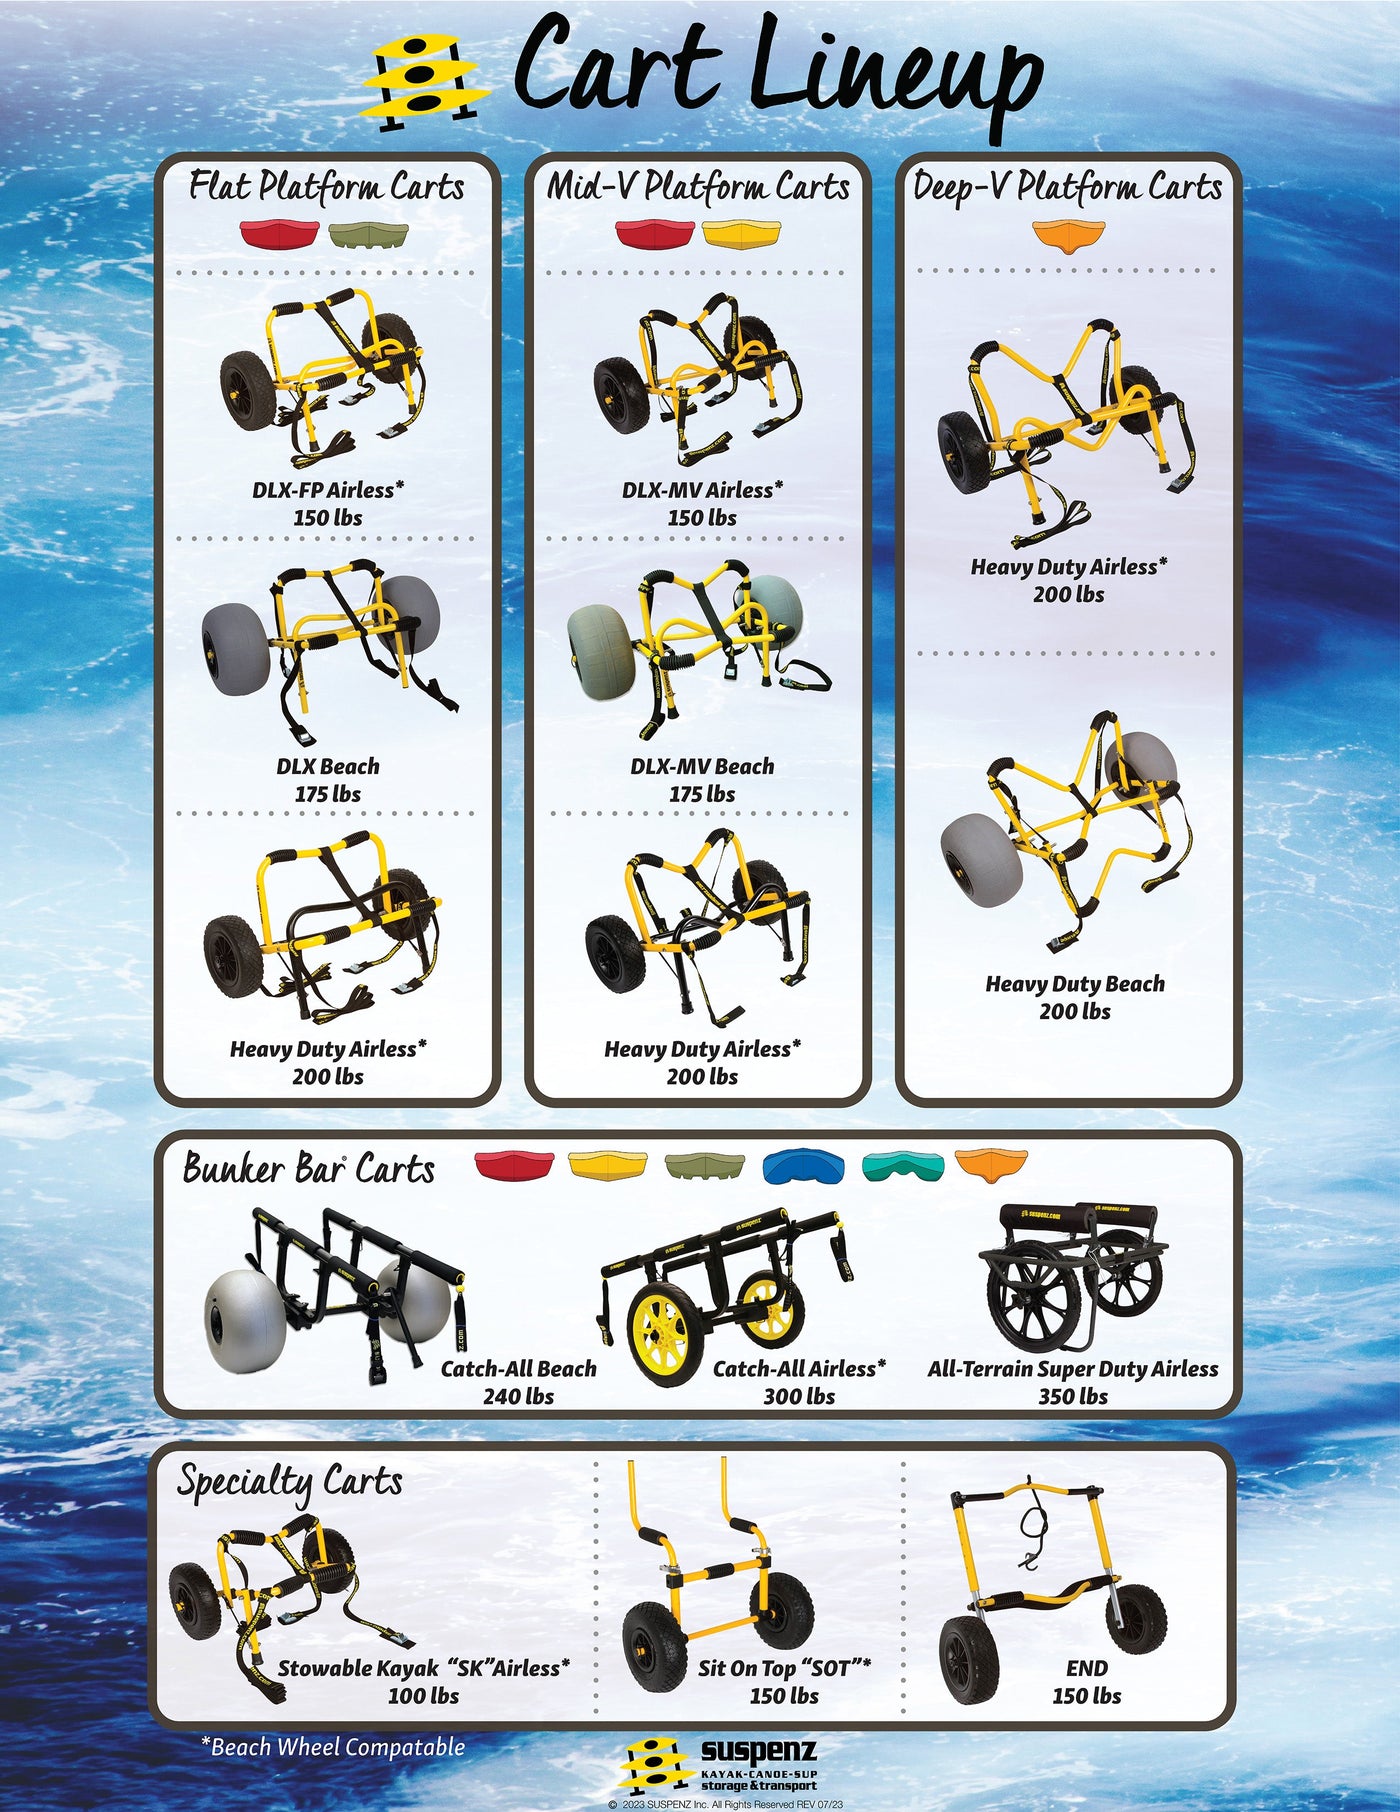 Guide on how to choose the right cart based on the boat type.